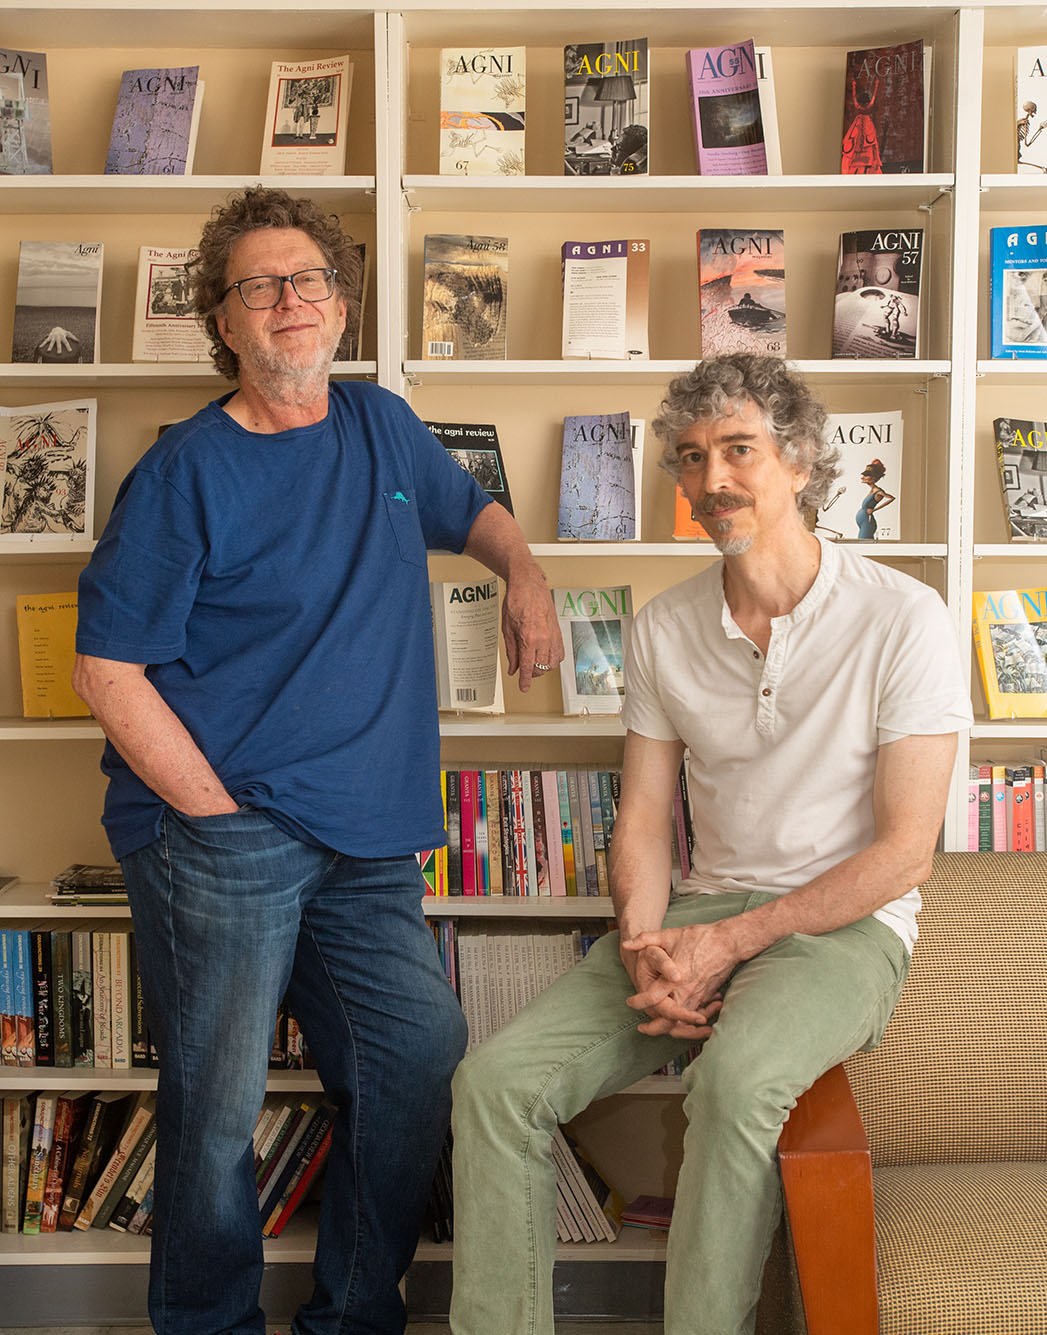 Photo of Sven Birkerts, left, and William Pierce in the AGNI offices on Bay State Rd. Birkerts, a white man with light brown curly hair and a silver grey beard, wears a blue shirt and jeans as he leans back with one arm on a bookcase behind him. Pierce, a white man with grey and brown curly hair wearing a white short sleeved shirt and light green pants, sits on an armchair to the right of Birkerts, also in front of the bookcase. The bookcase behind spans the entire wall and is made of a light wood. Many books on it feature the title "AGNI"